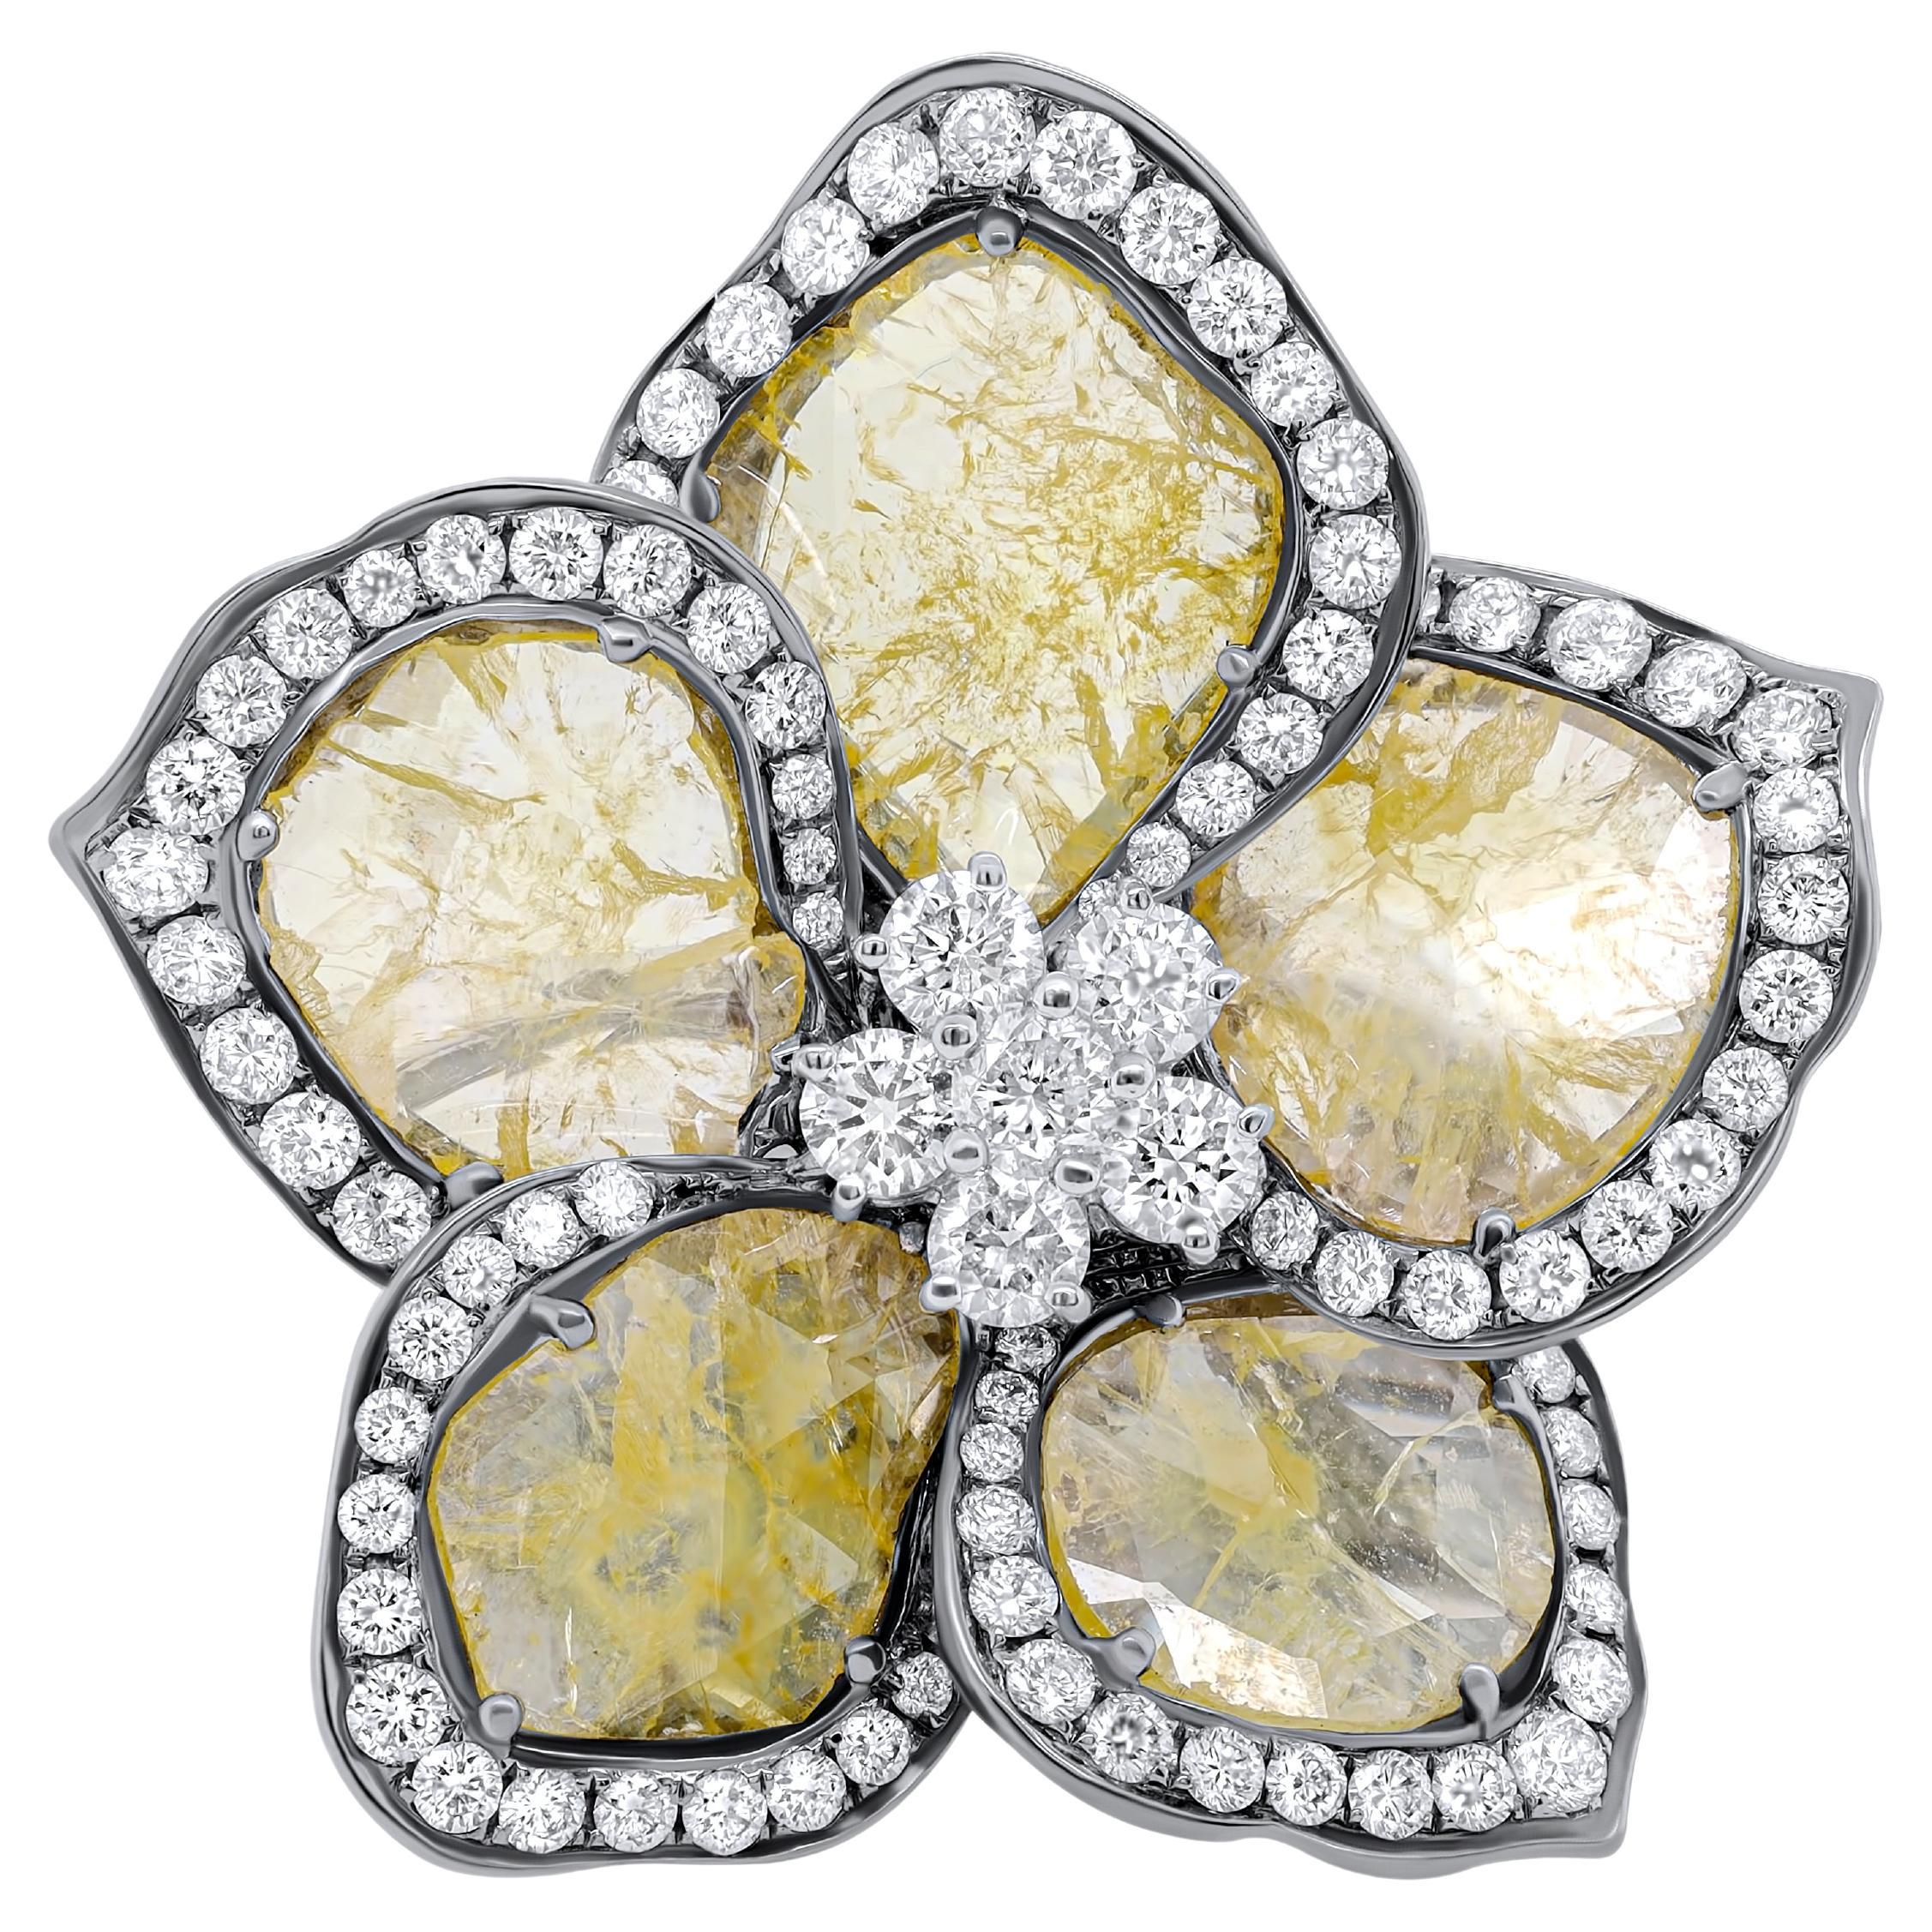 Diana M .18kt wg diamond ring  flower design with 6.53cts yellow sliced diamonds For Sale